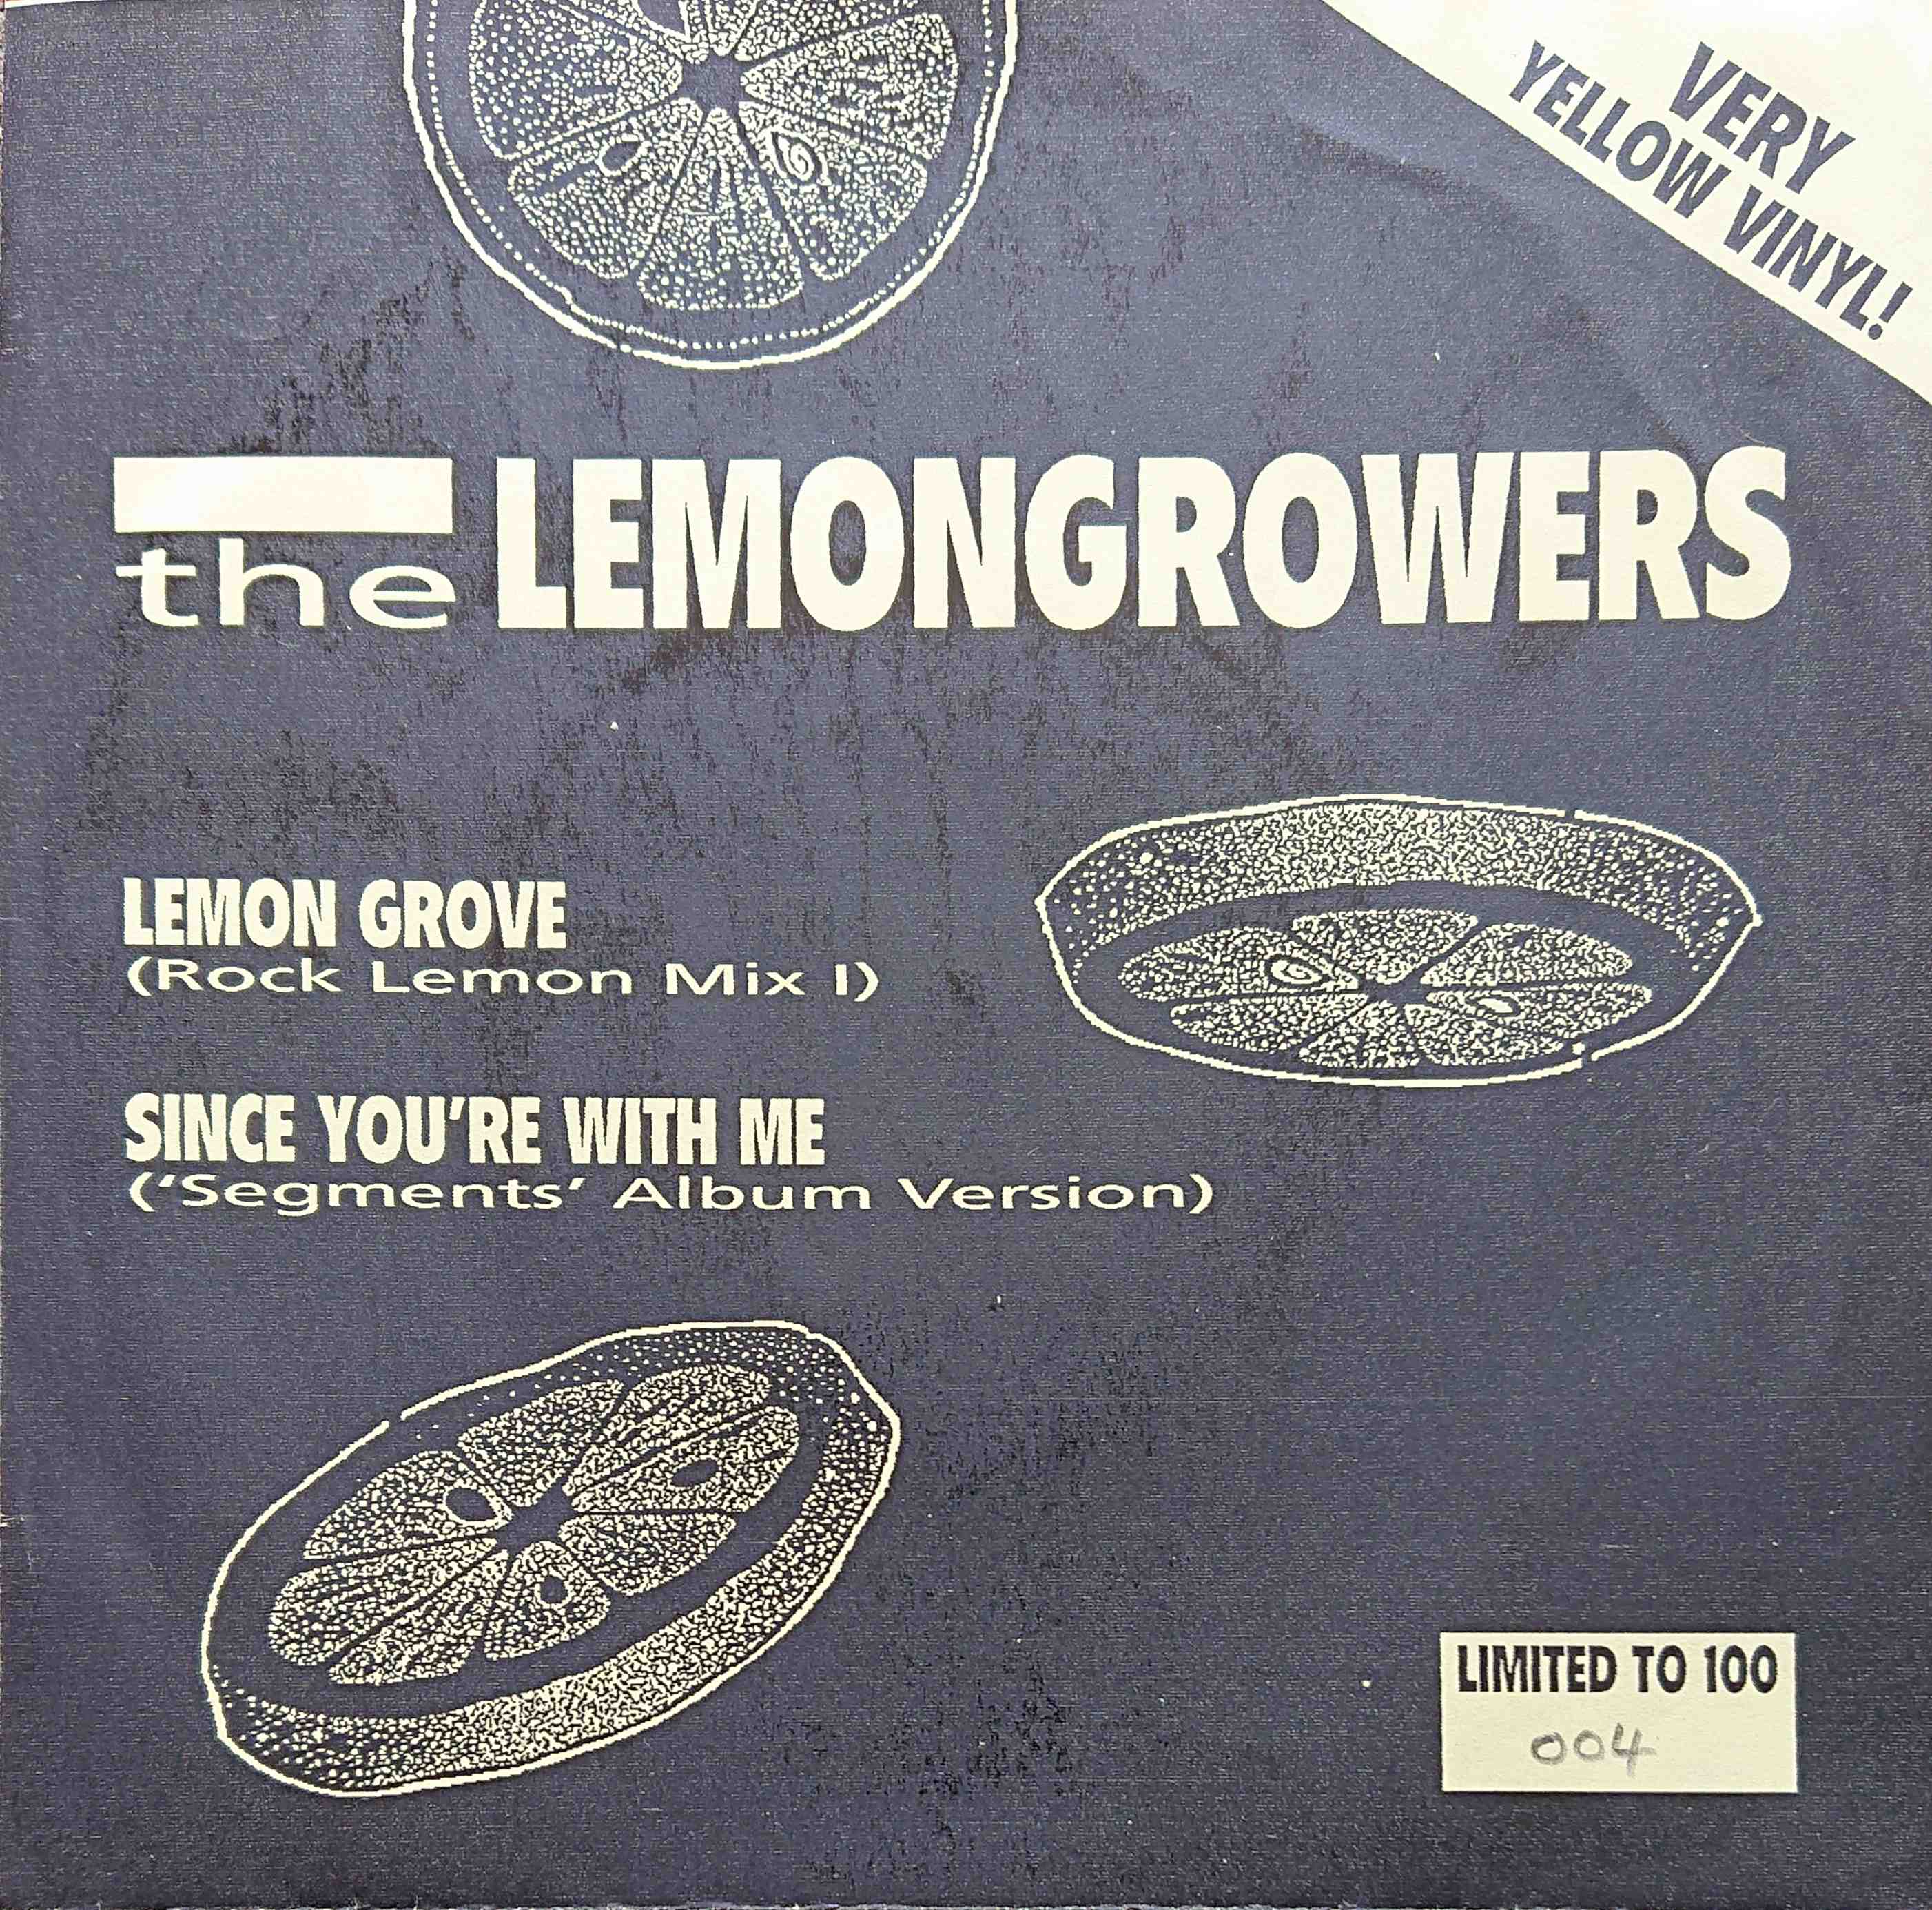 Picture of Lemon grove by artist The Lemon Growers 